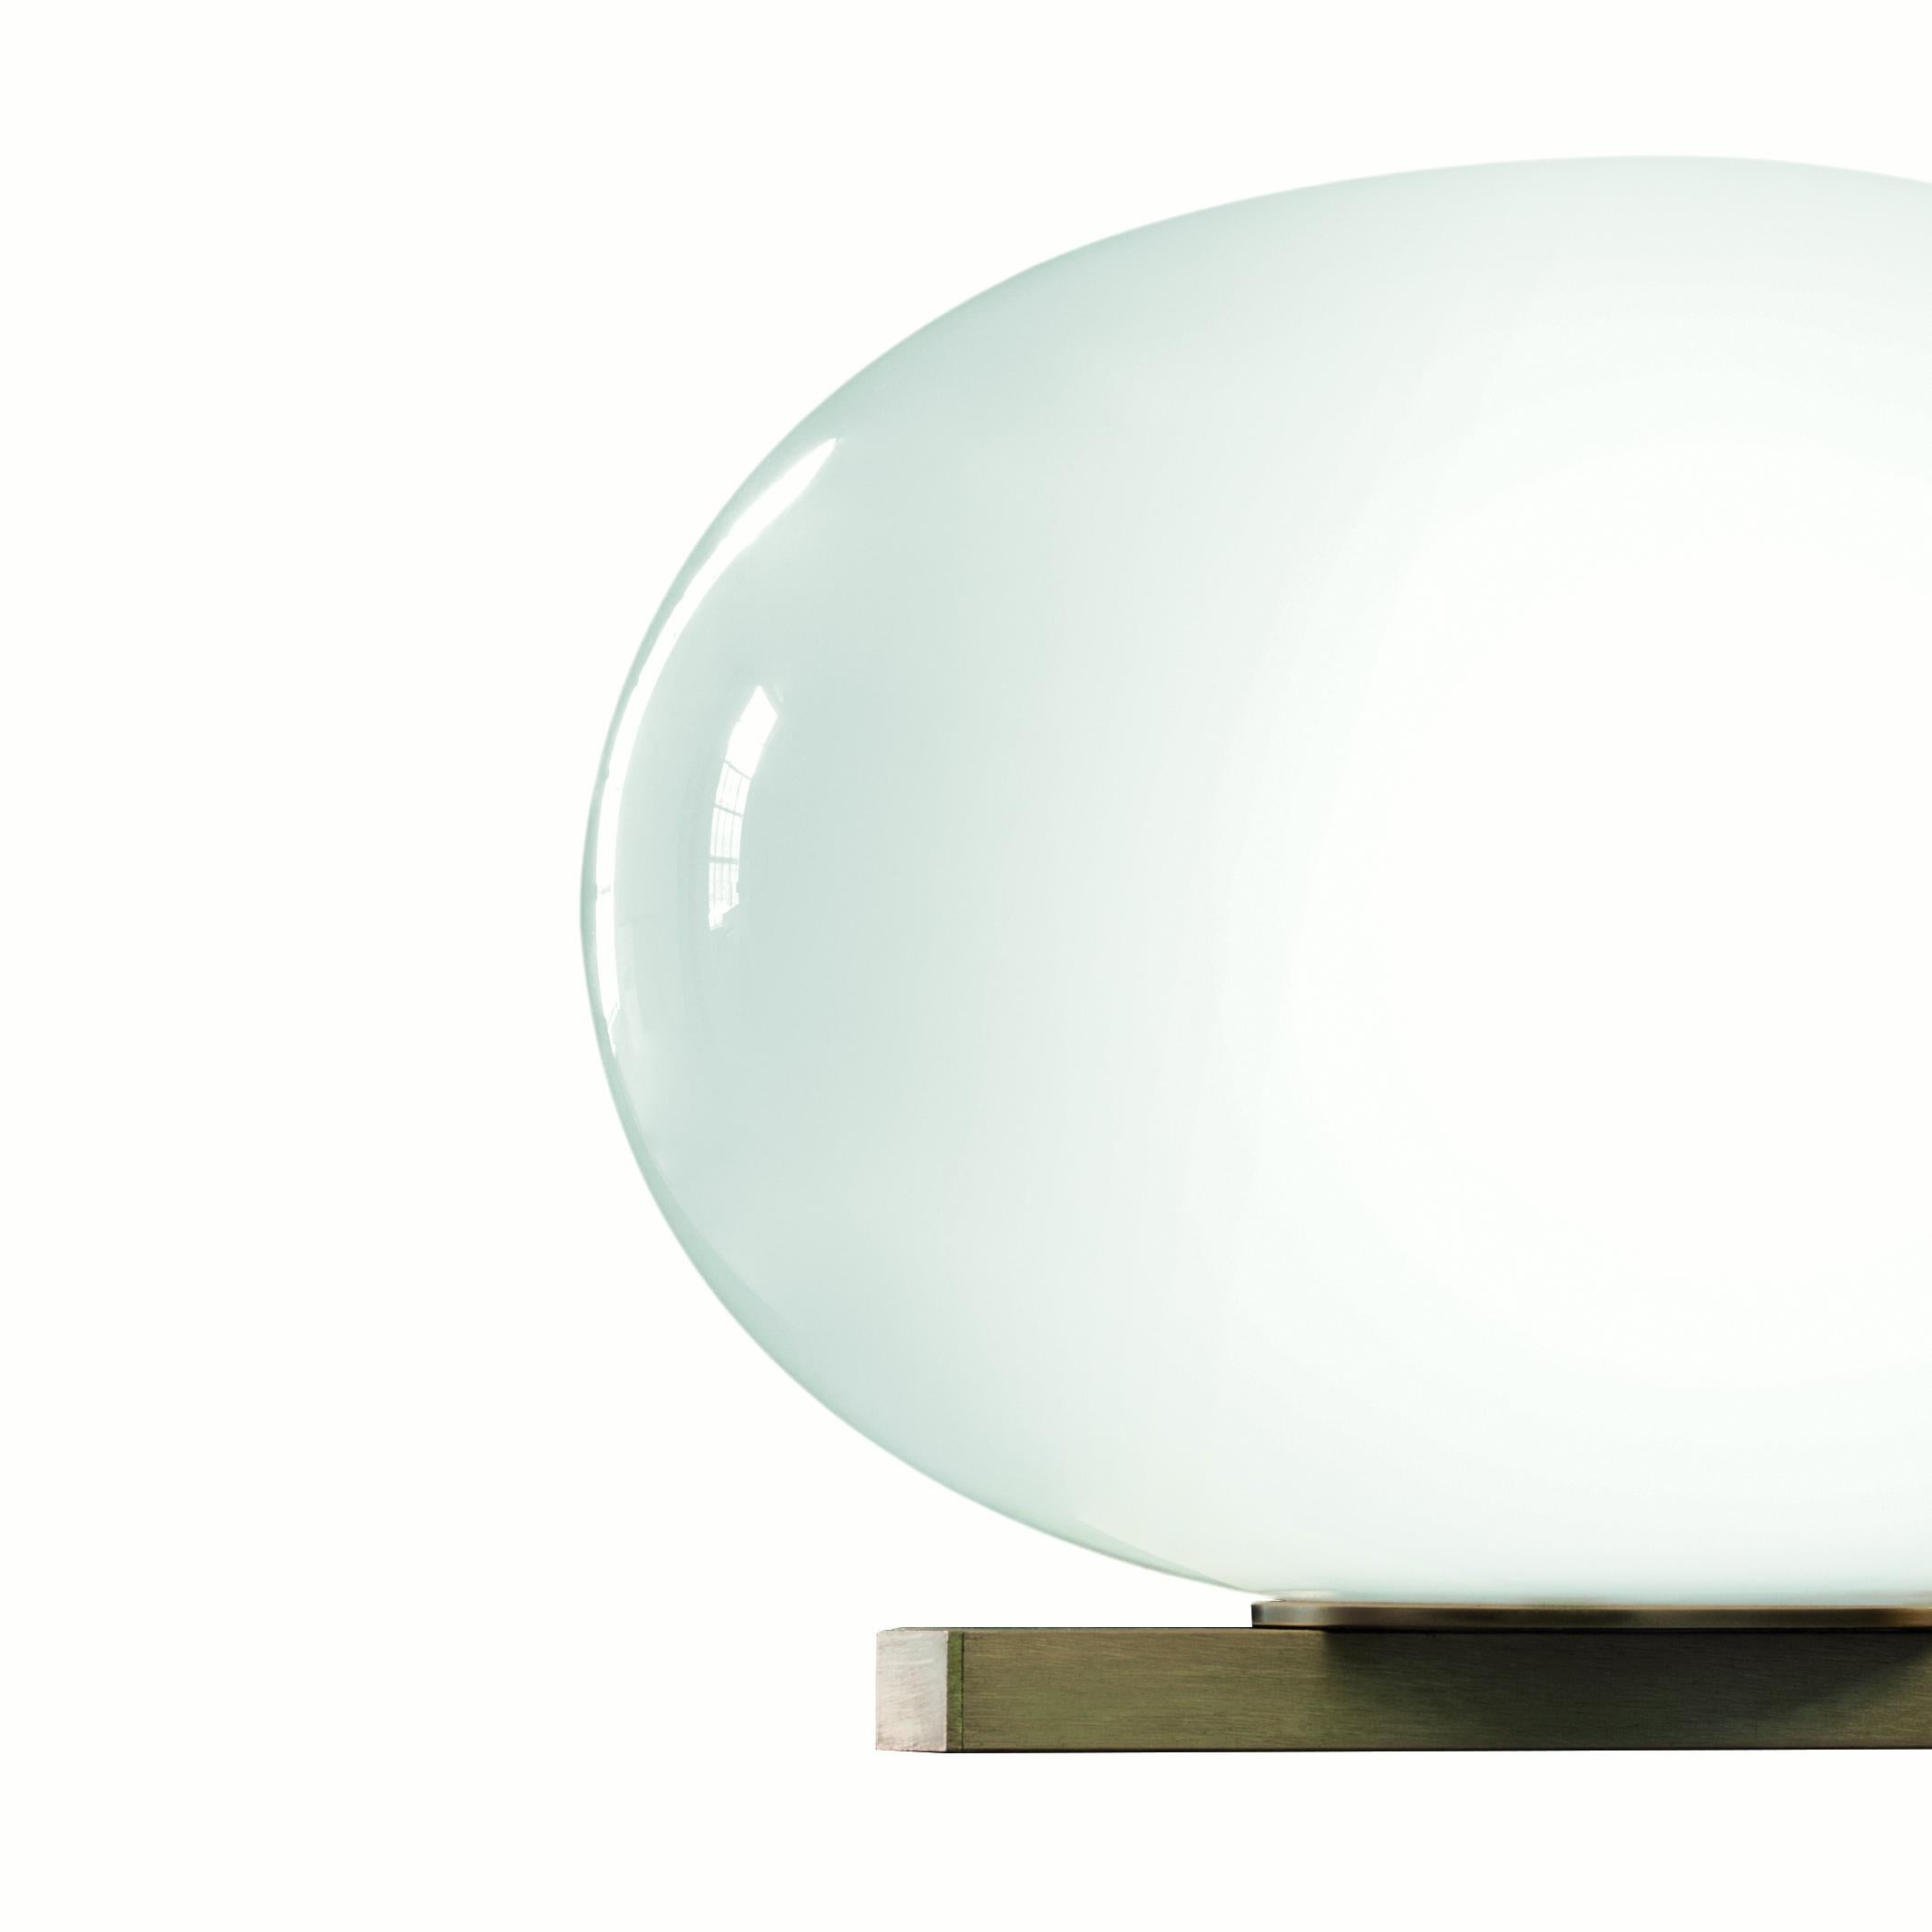 Wall lamp 'Alba' designed by Mariana Pellegrino Soto in 2019.
Wall lamp giving diffused light in polished opaline blown-glass. Satin brass finish structure with rectangular profile. Manufactured by Oluce, Italy.

The concept of Alba starts with a